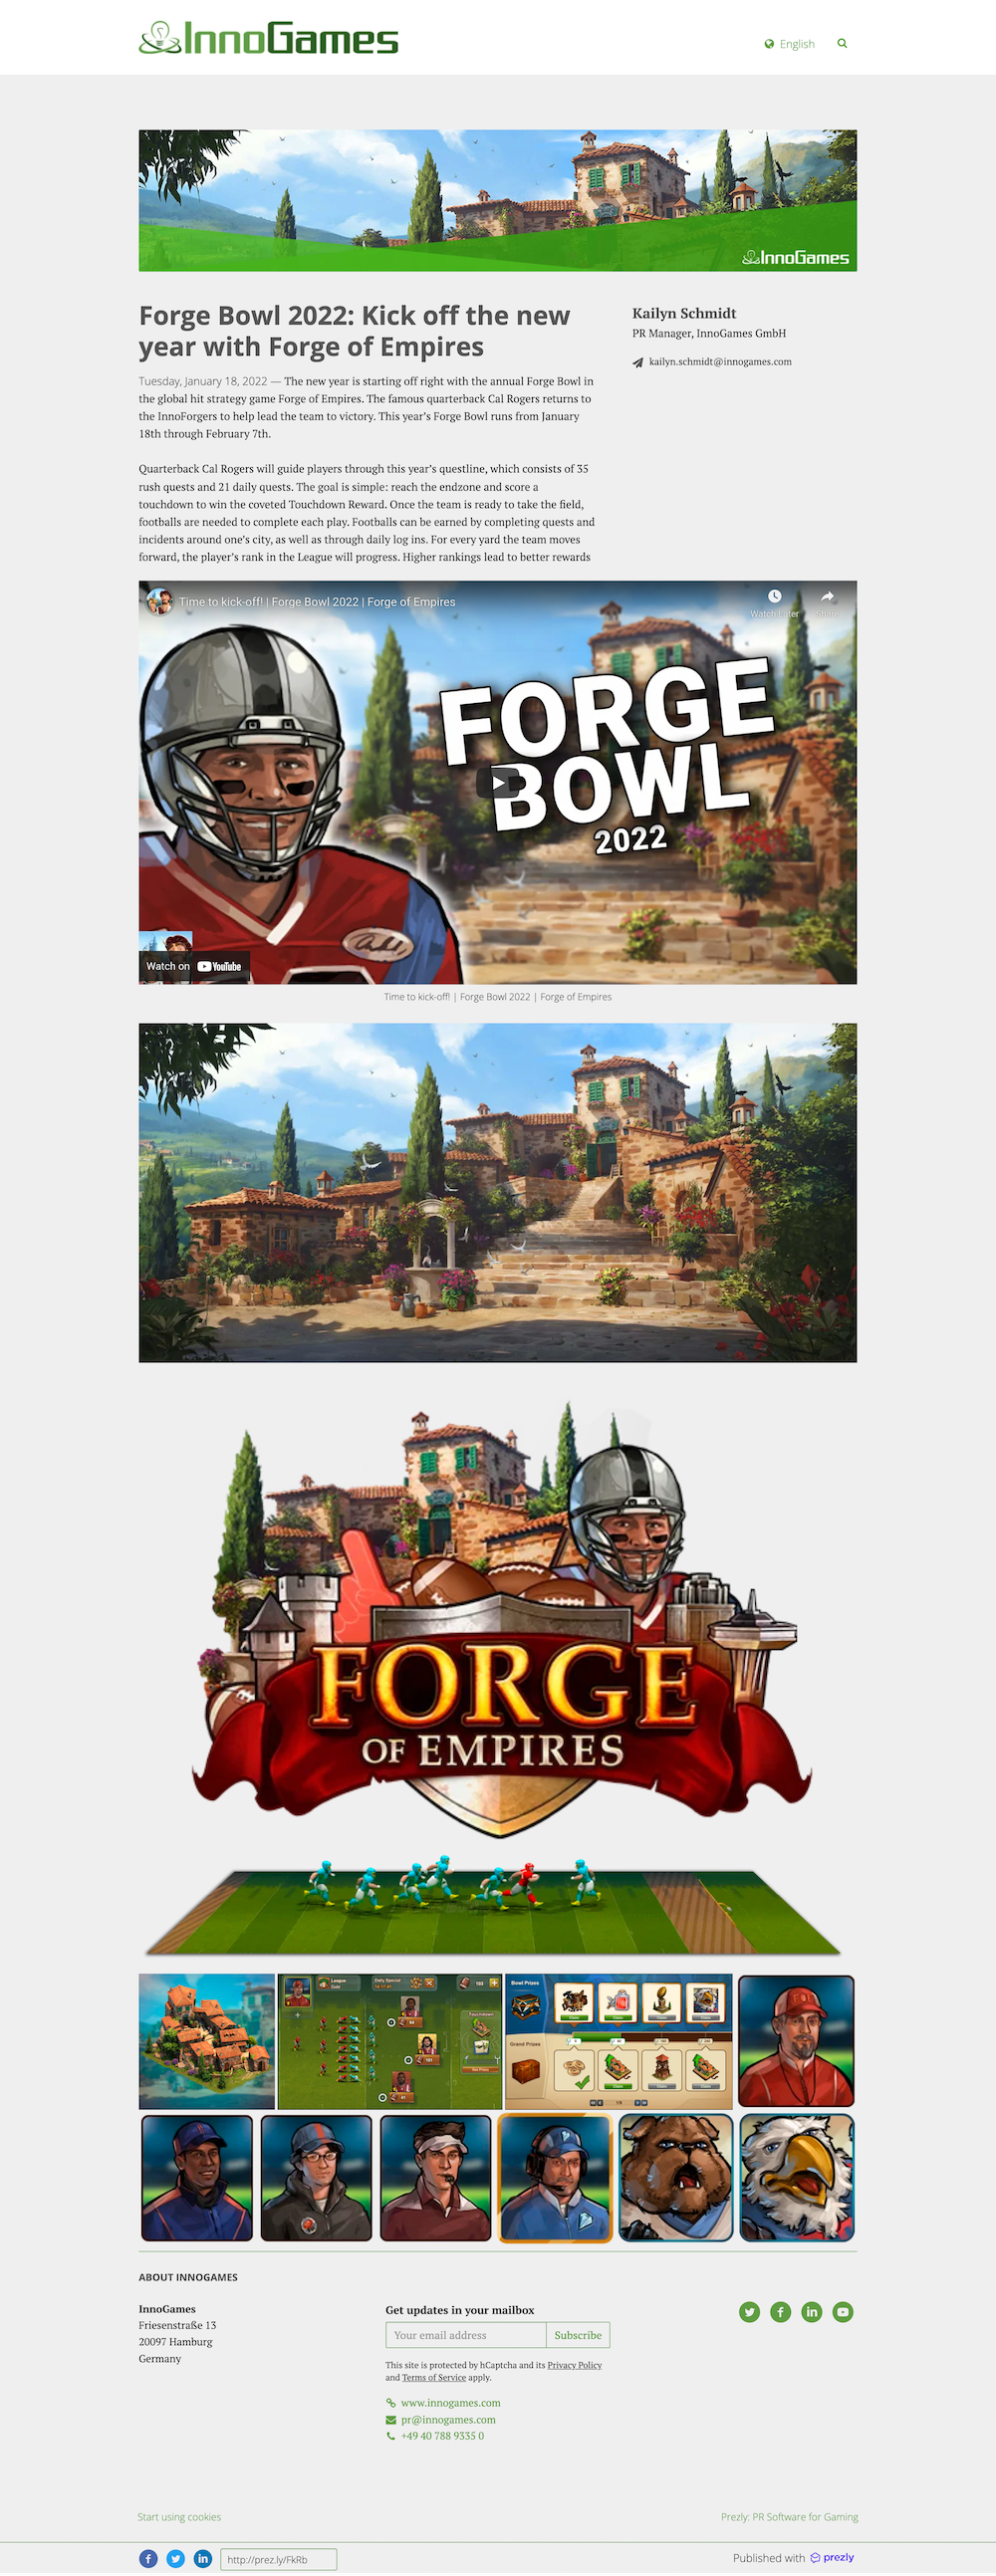 Forge Bowl 2022: Kick off the new year with Forge of Empires